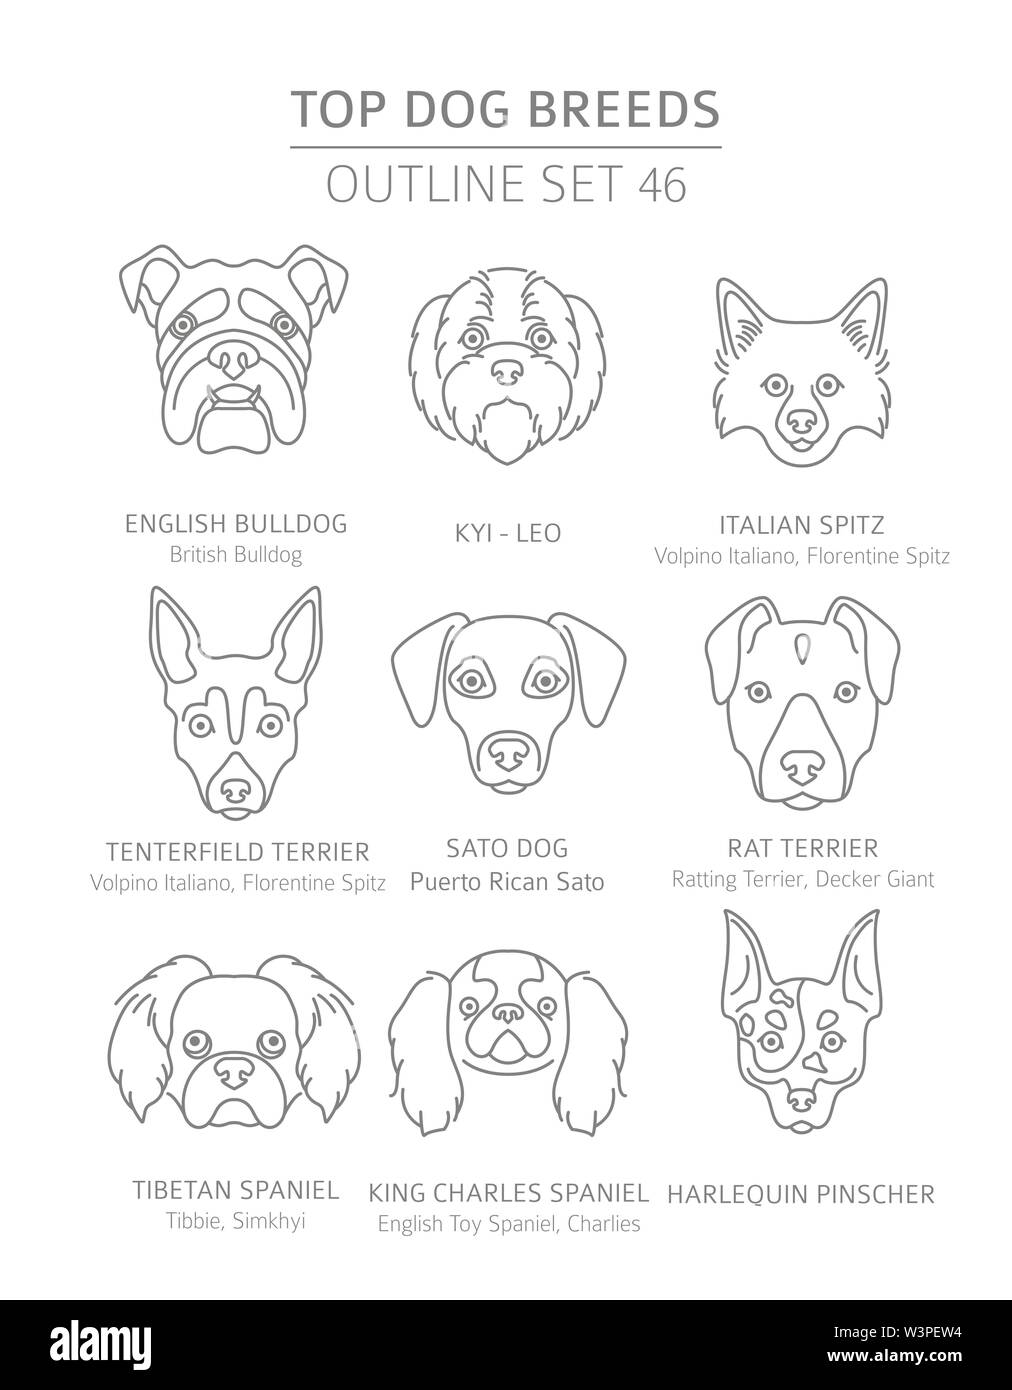 Top dog breeds. Hunting, shepherd and companion dogs set. Pet outline collection. Vector illustration Stock Vector